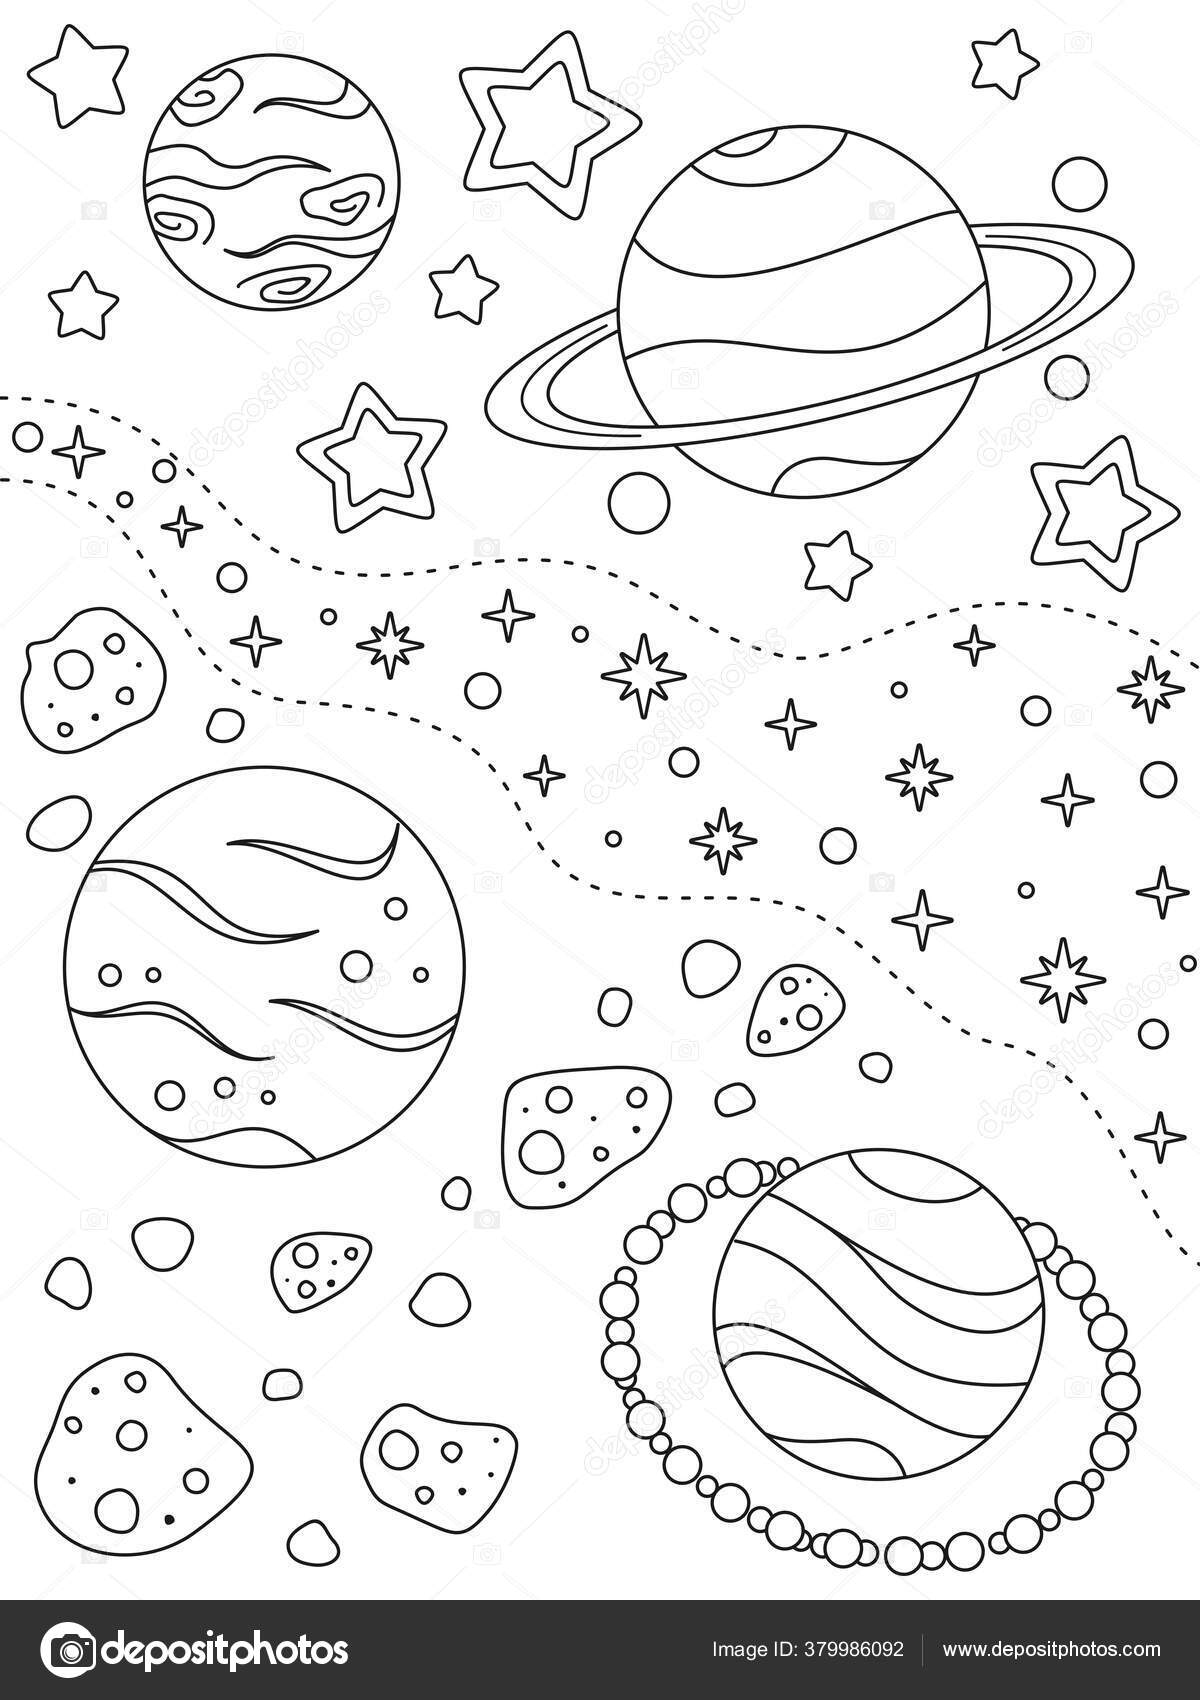 Coloring Page Different Planets Asteroids Nebulae Stars Black ...